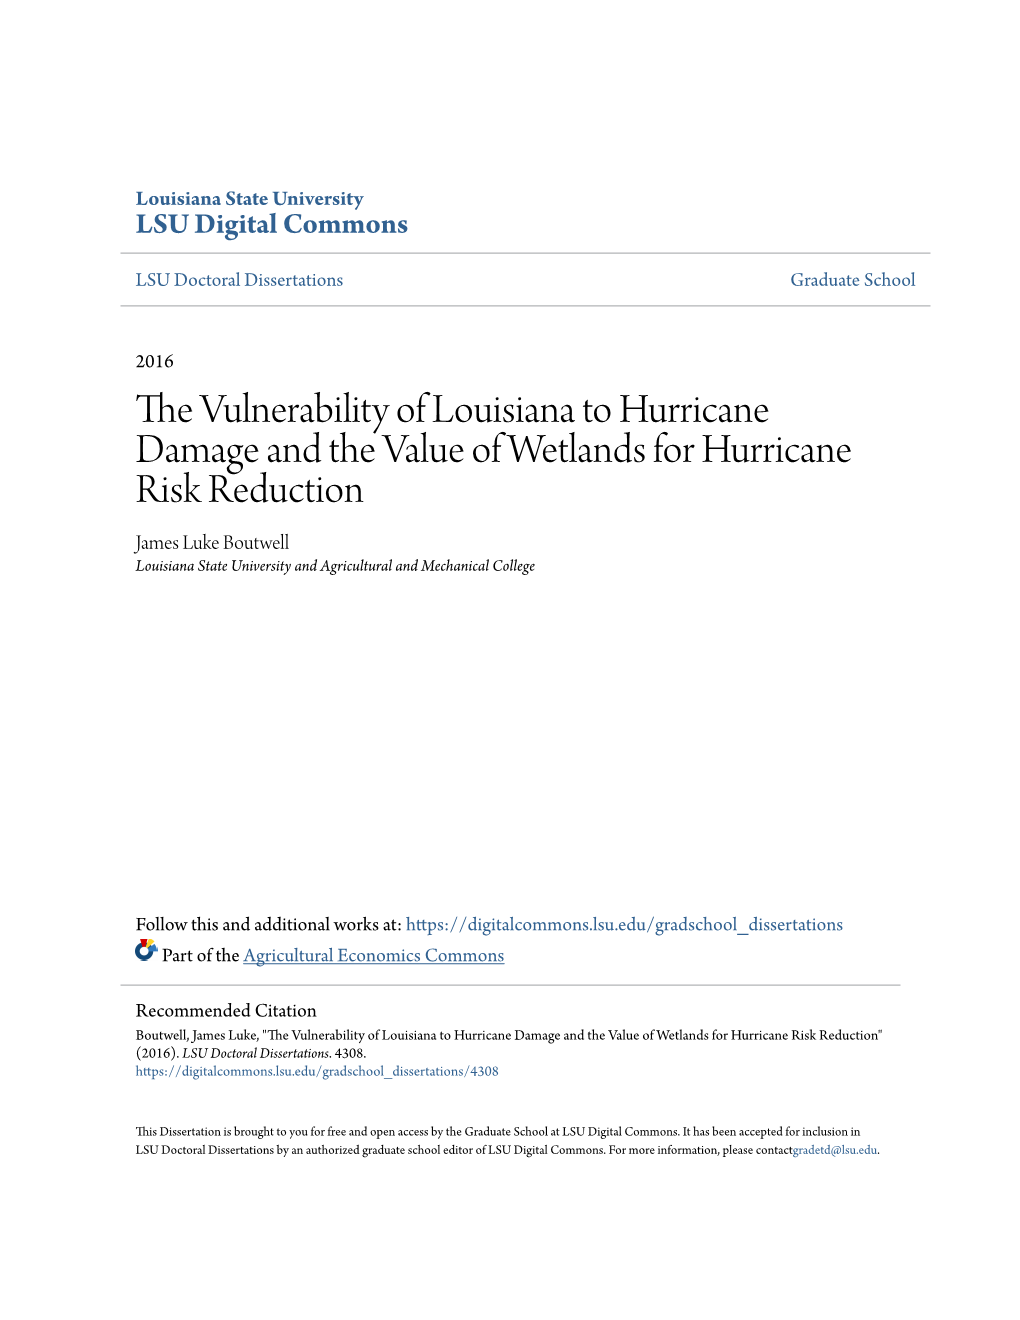 The Vulnerability of Louisiana to Hurricane Damage and the Value of Wetlands for Hurricane Risk Reduction